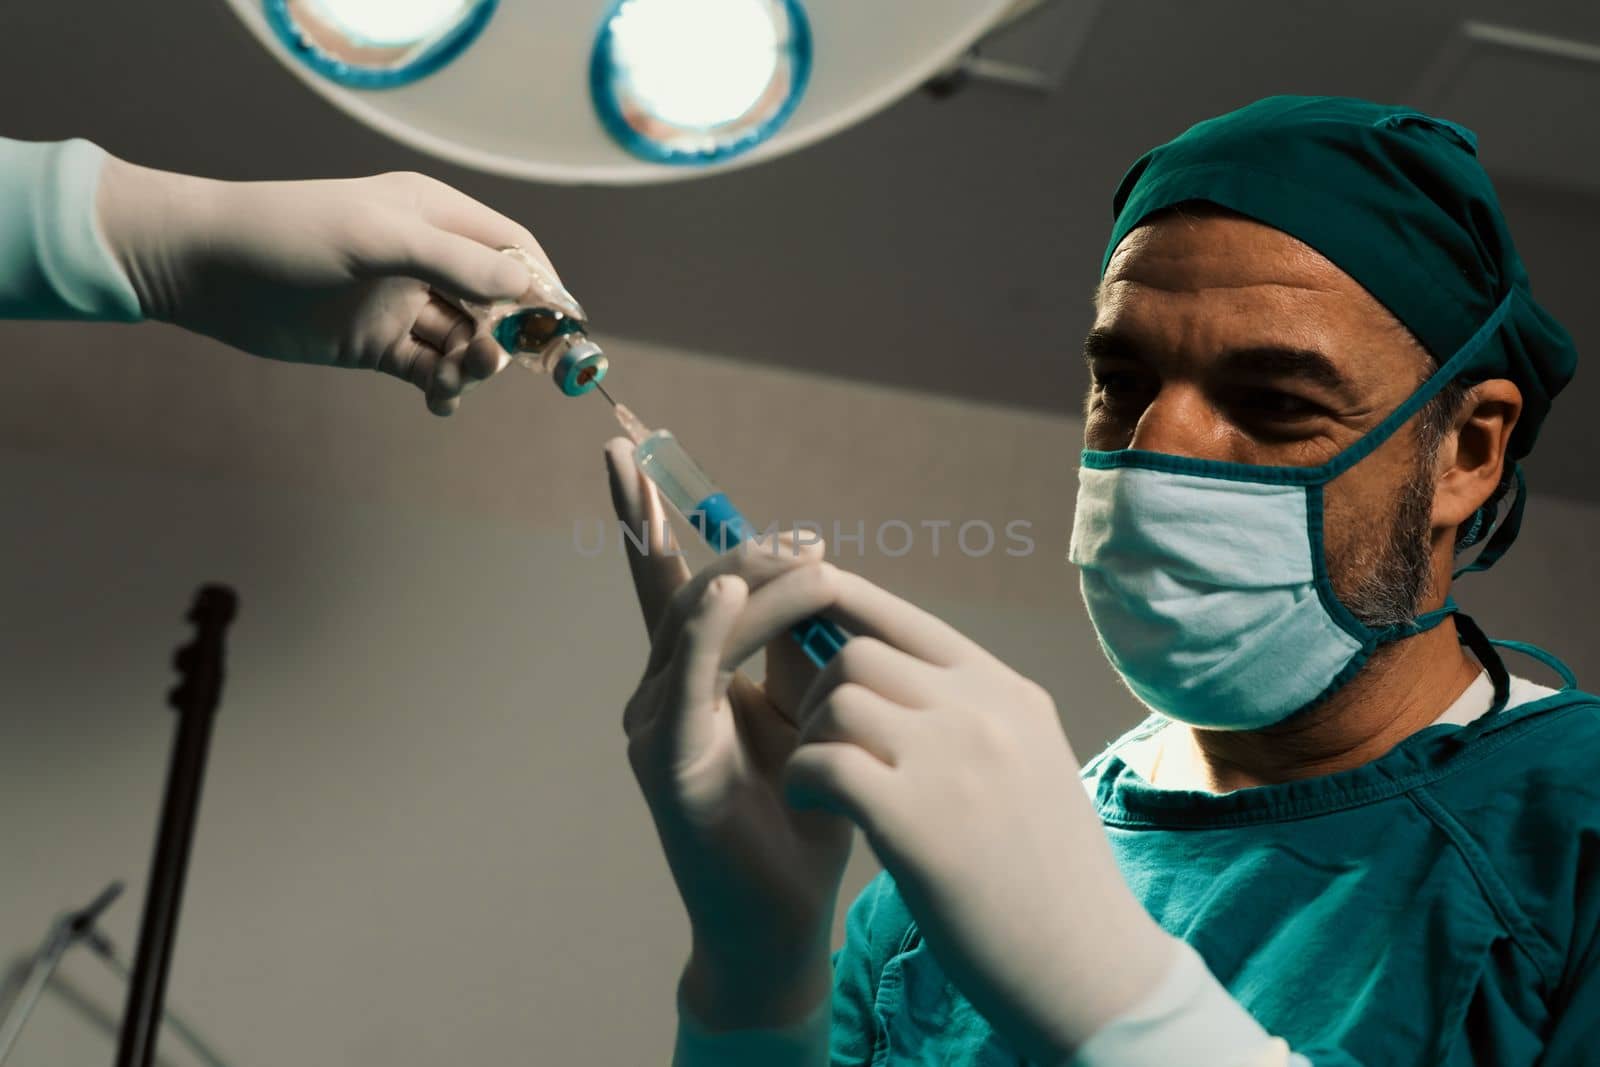 Surgeon fill syringe from medical vial for surgical procedure at sterile operation room with assistance nurse. Doctor and medical staff in full protective wear for surgery prepare anesthesia injection